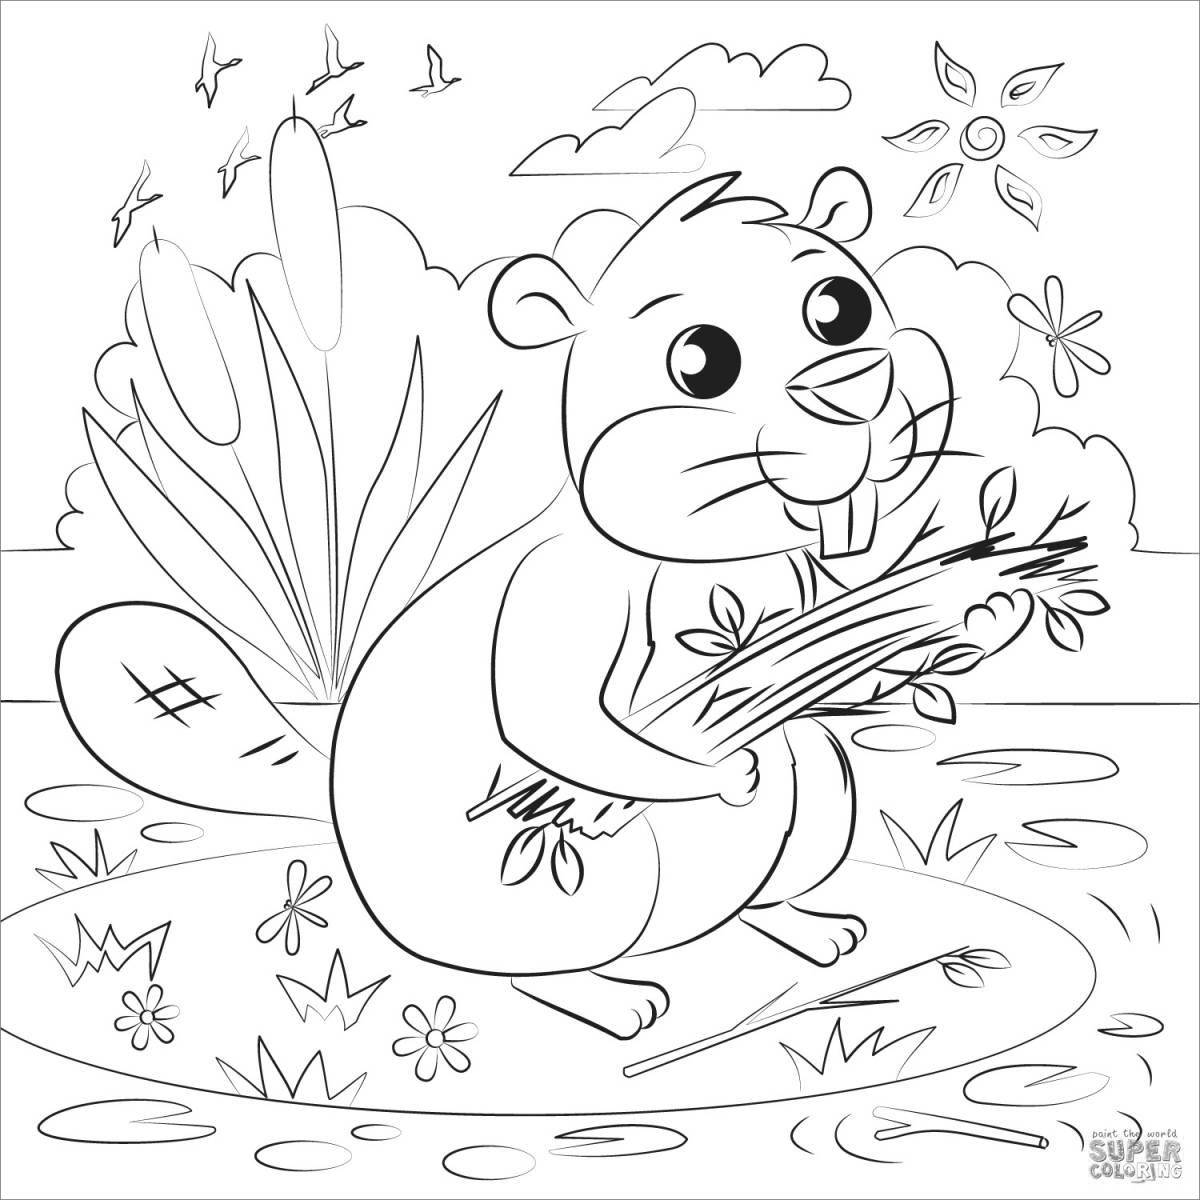 Smiling beaver coloring page